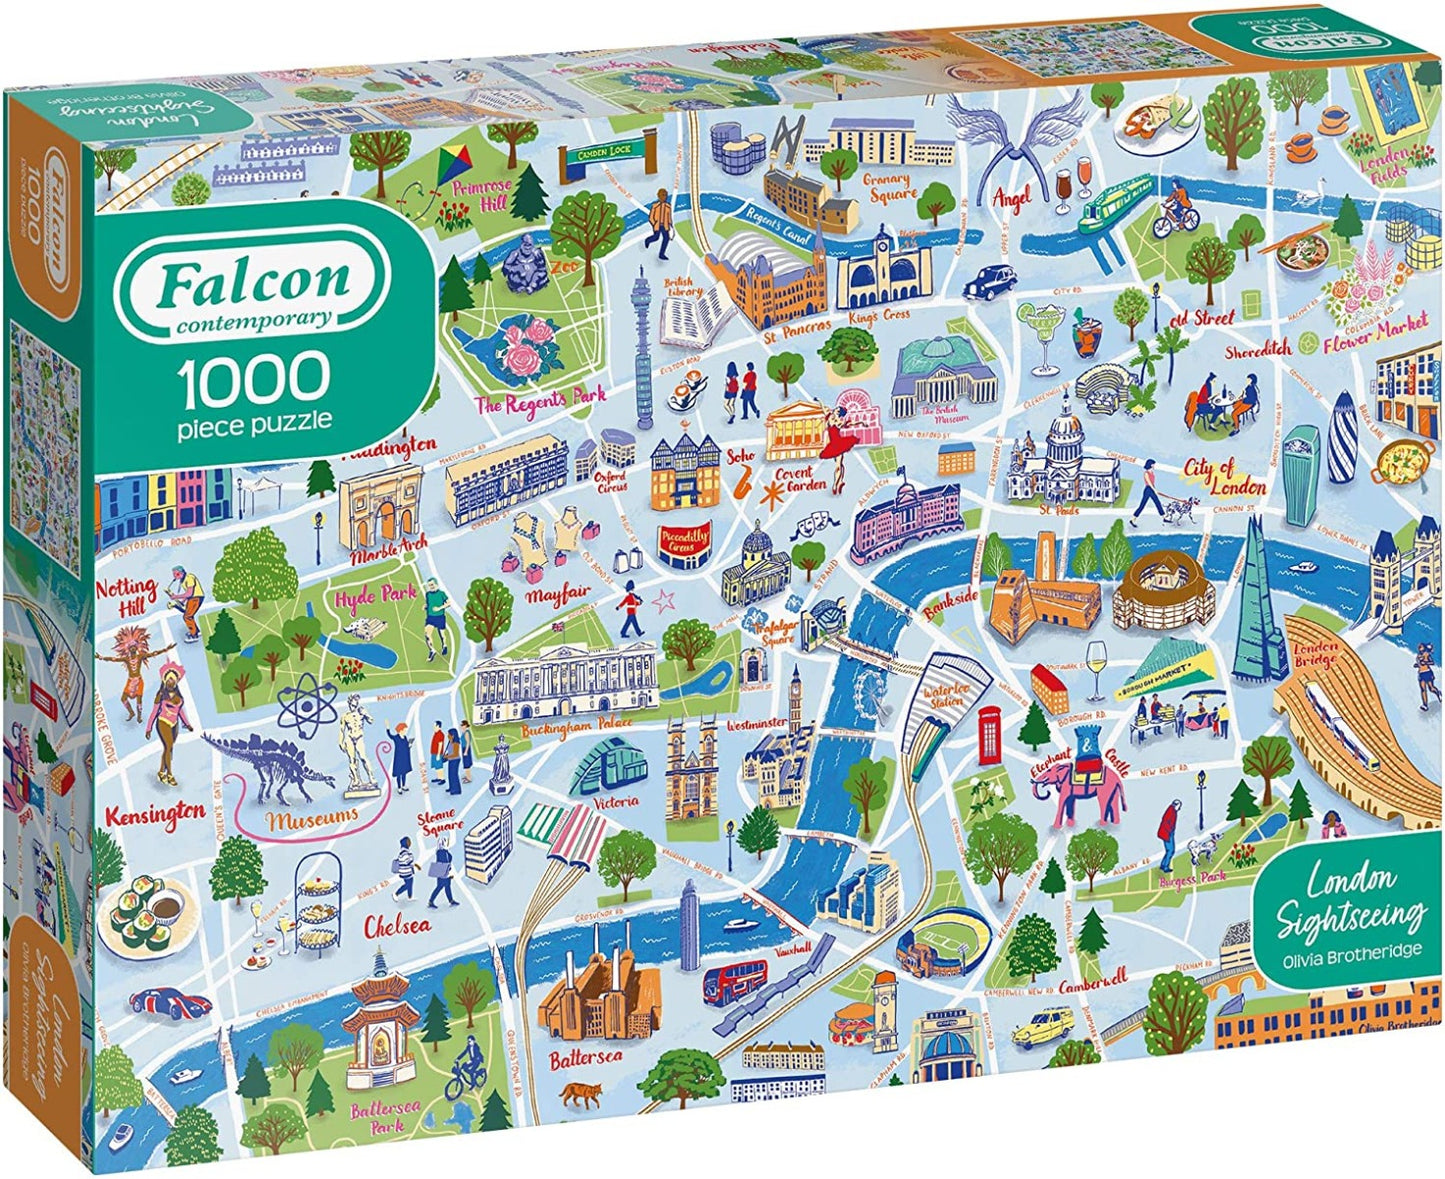 Falcon Contemporary - London Sightseeing - 1000 Piece Puzzle